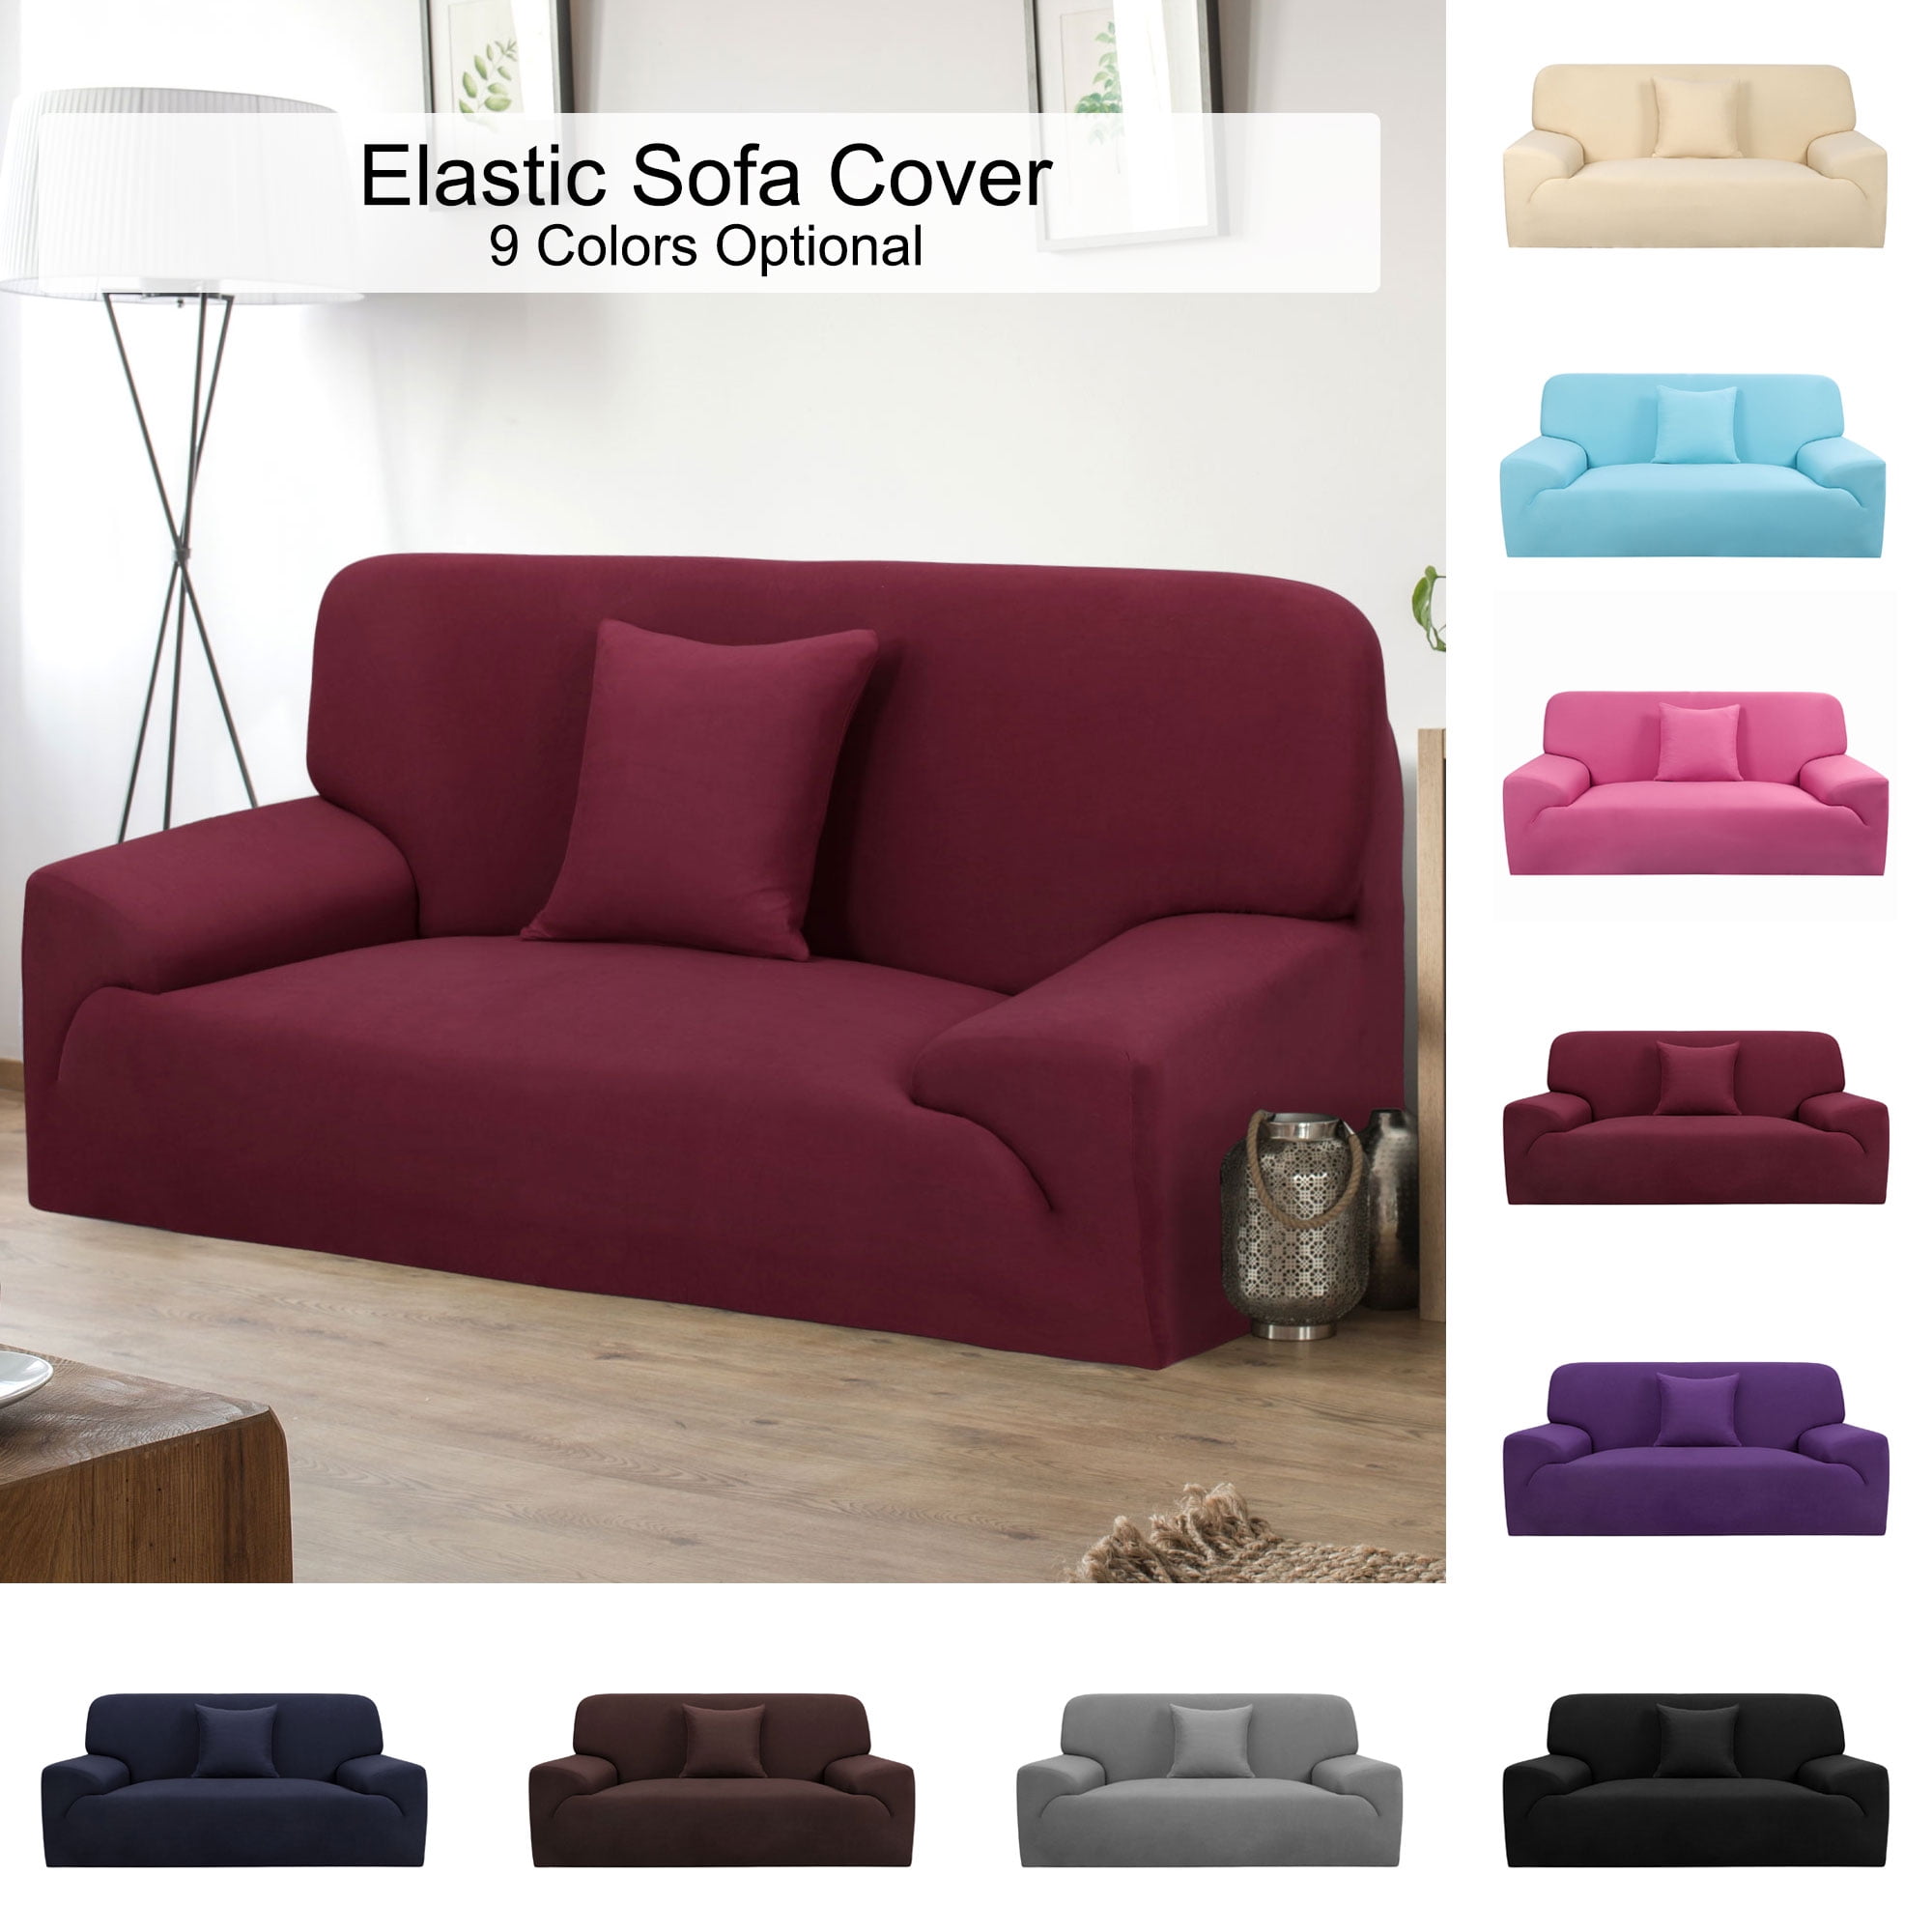 Details about   1/2/3 Seater Stretch Chair Sofa Cover Slipcover Couch Loose Covers Elastic . 